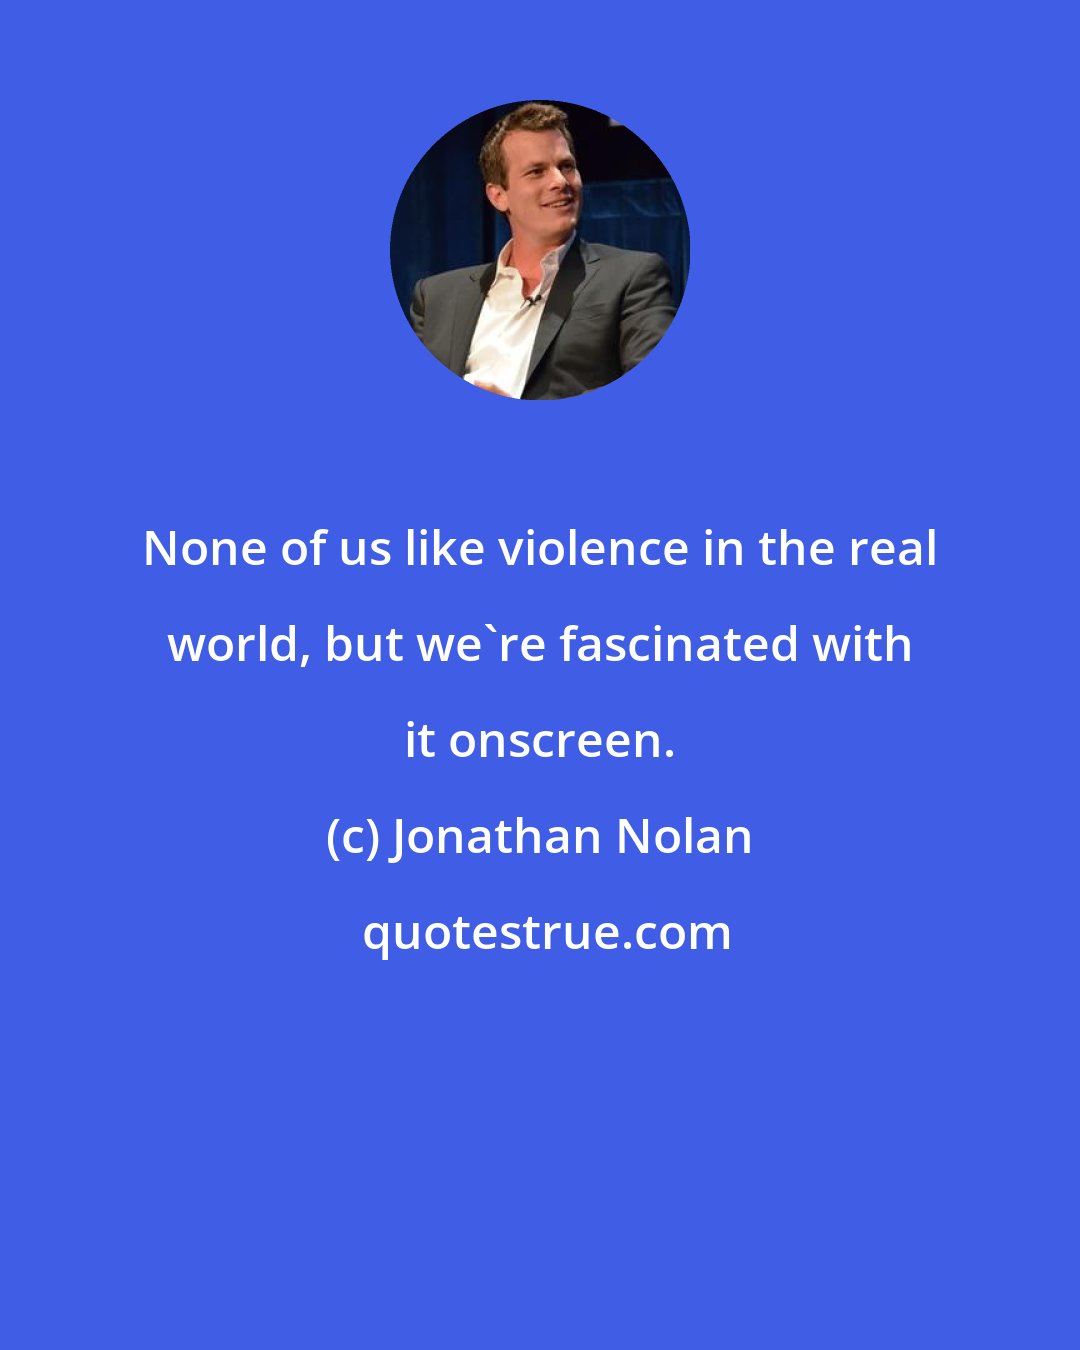 Jonathan Nolan: None of us like violence in the real world, but we're fascinated with it onscreen.